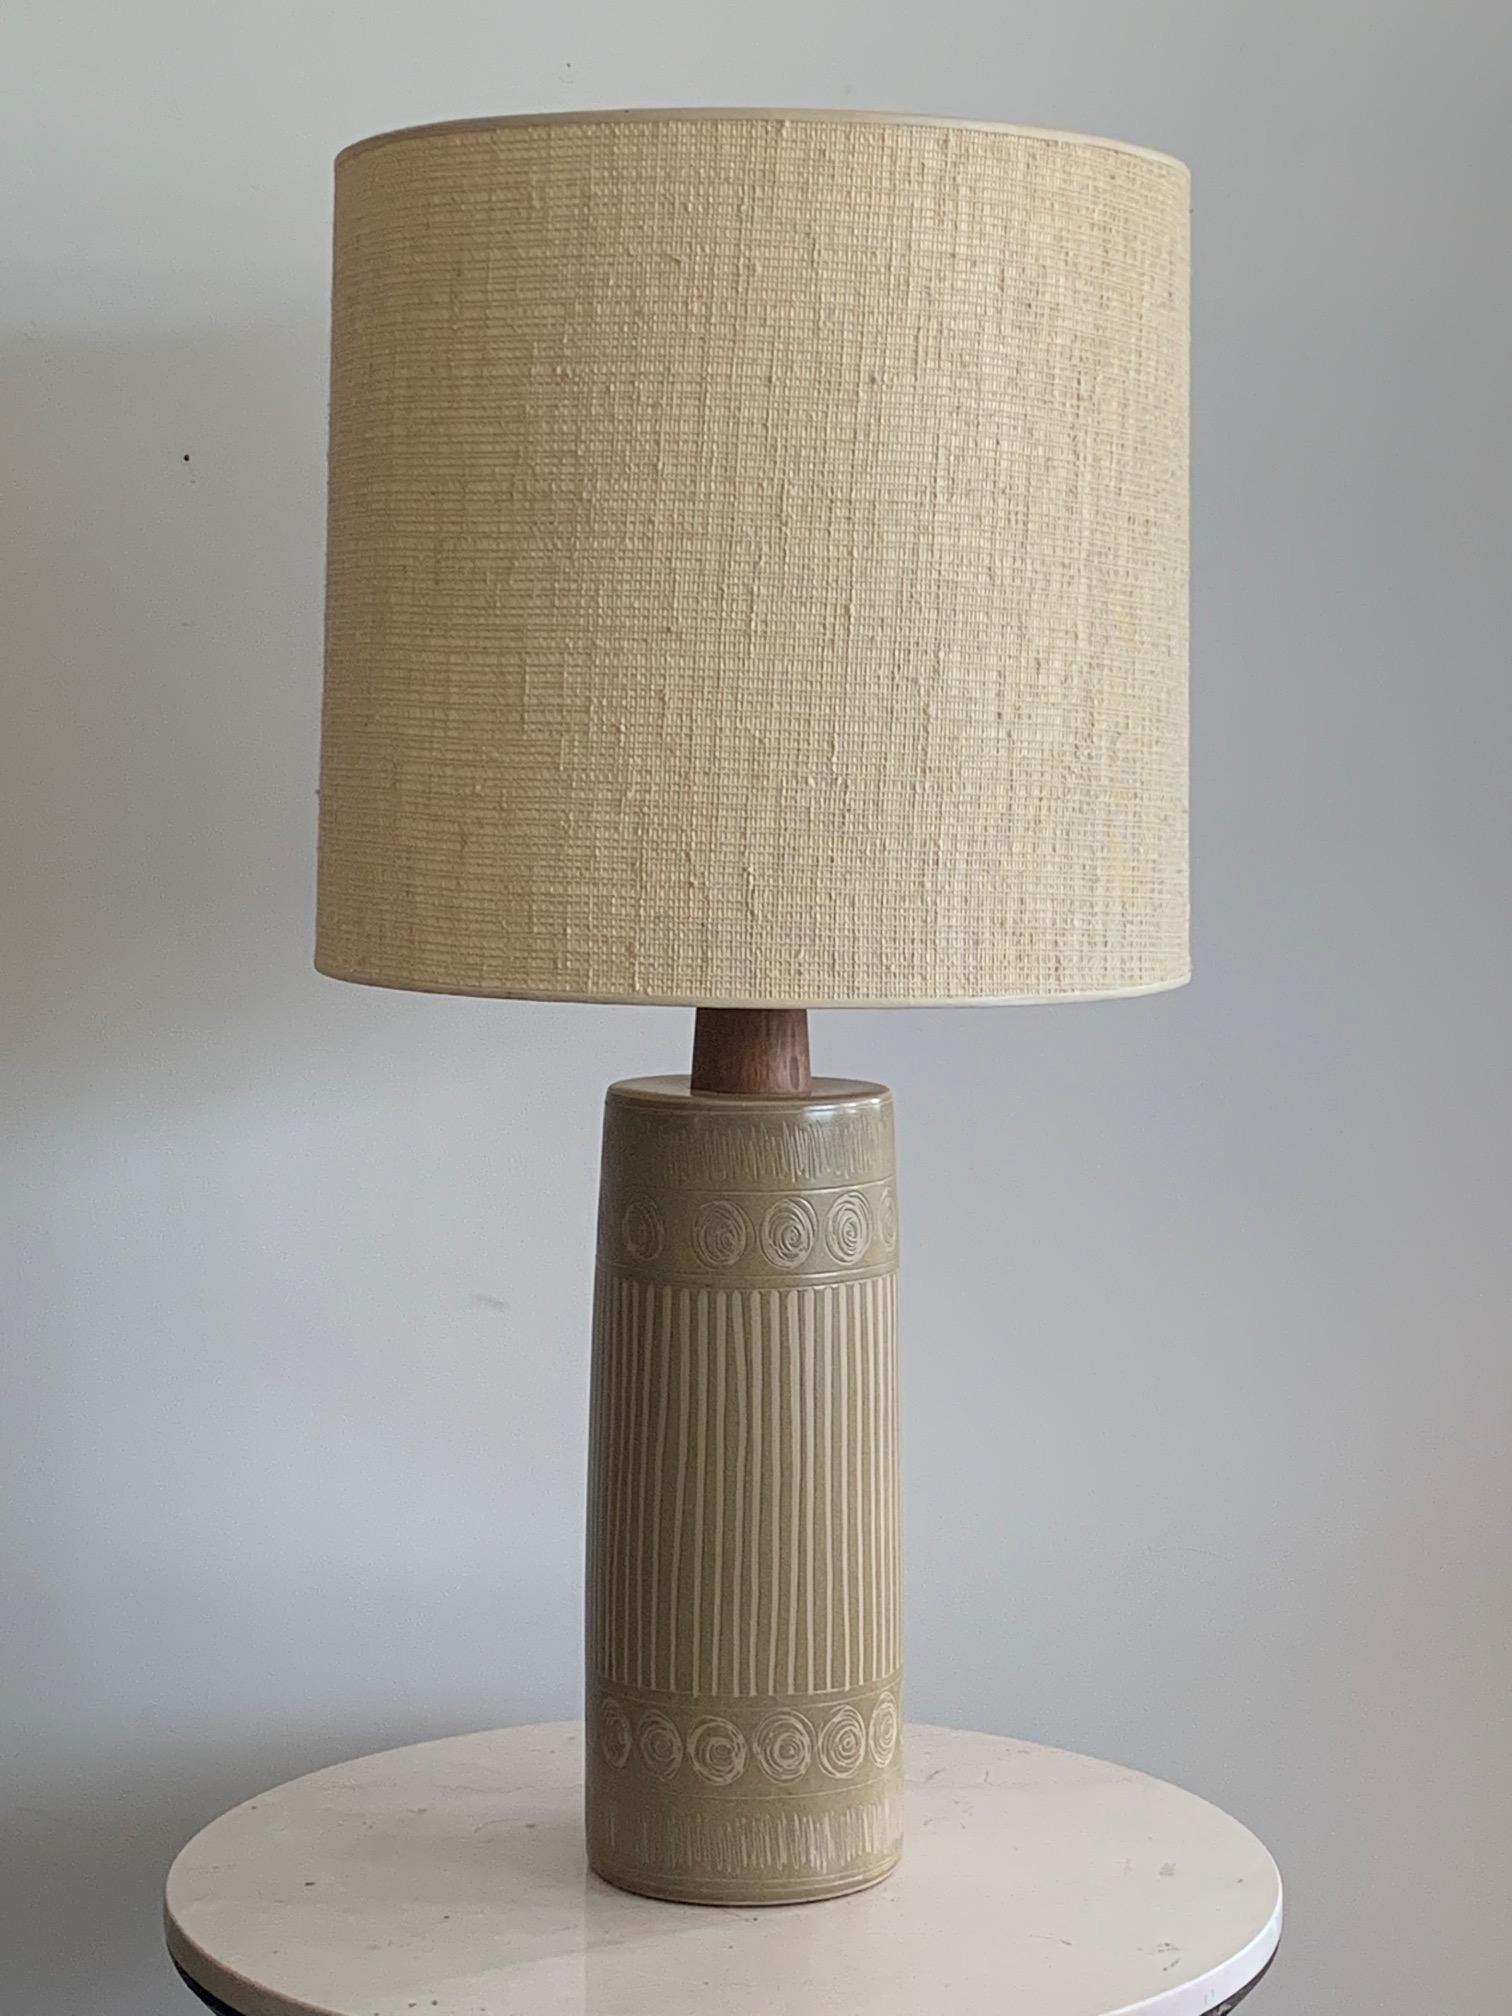 Monumental Martz Lamp with Sgraffito Decoration For Sale 2